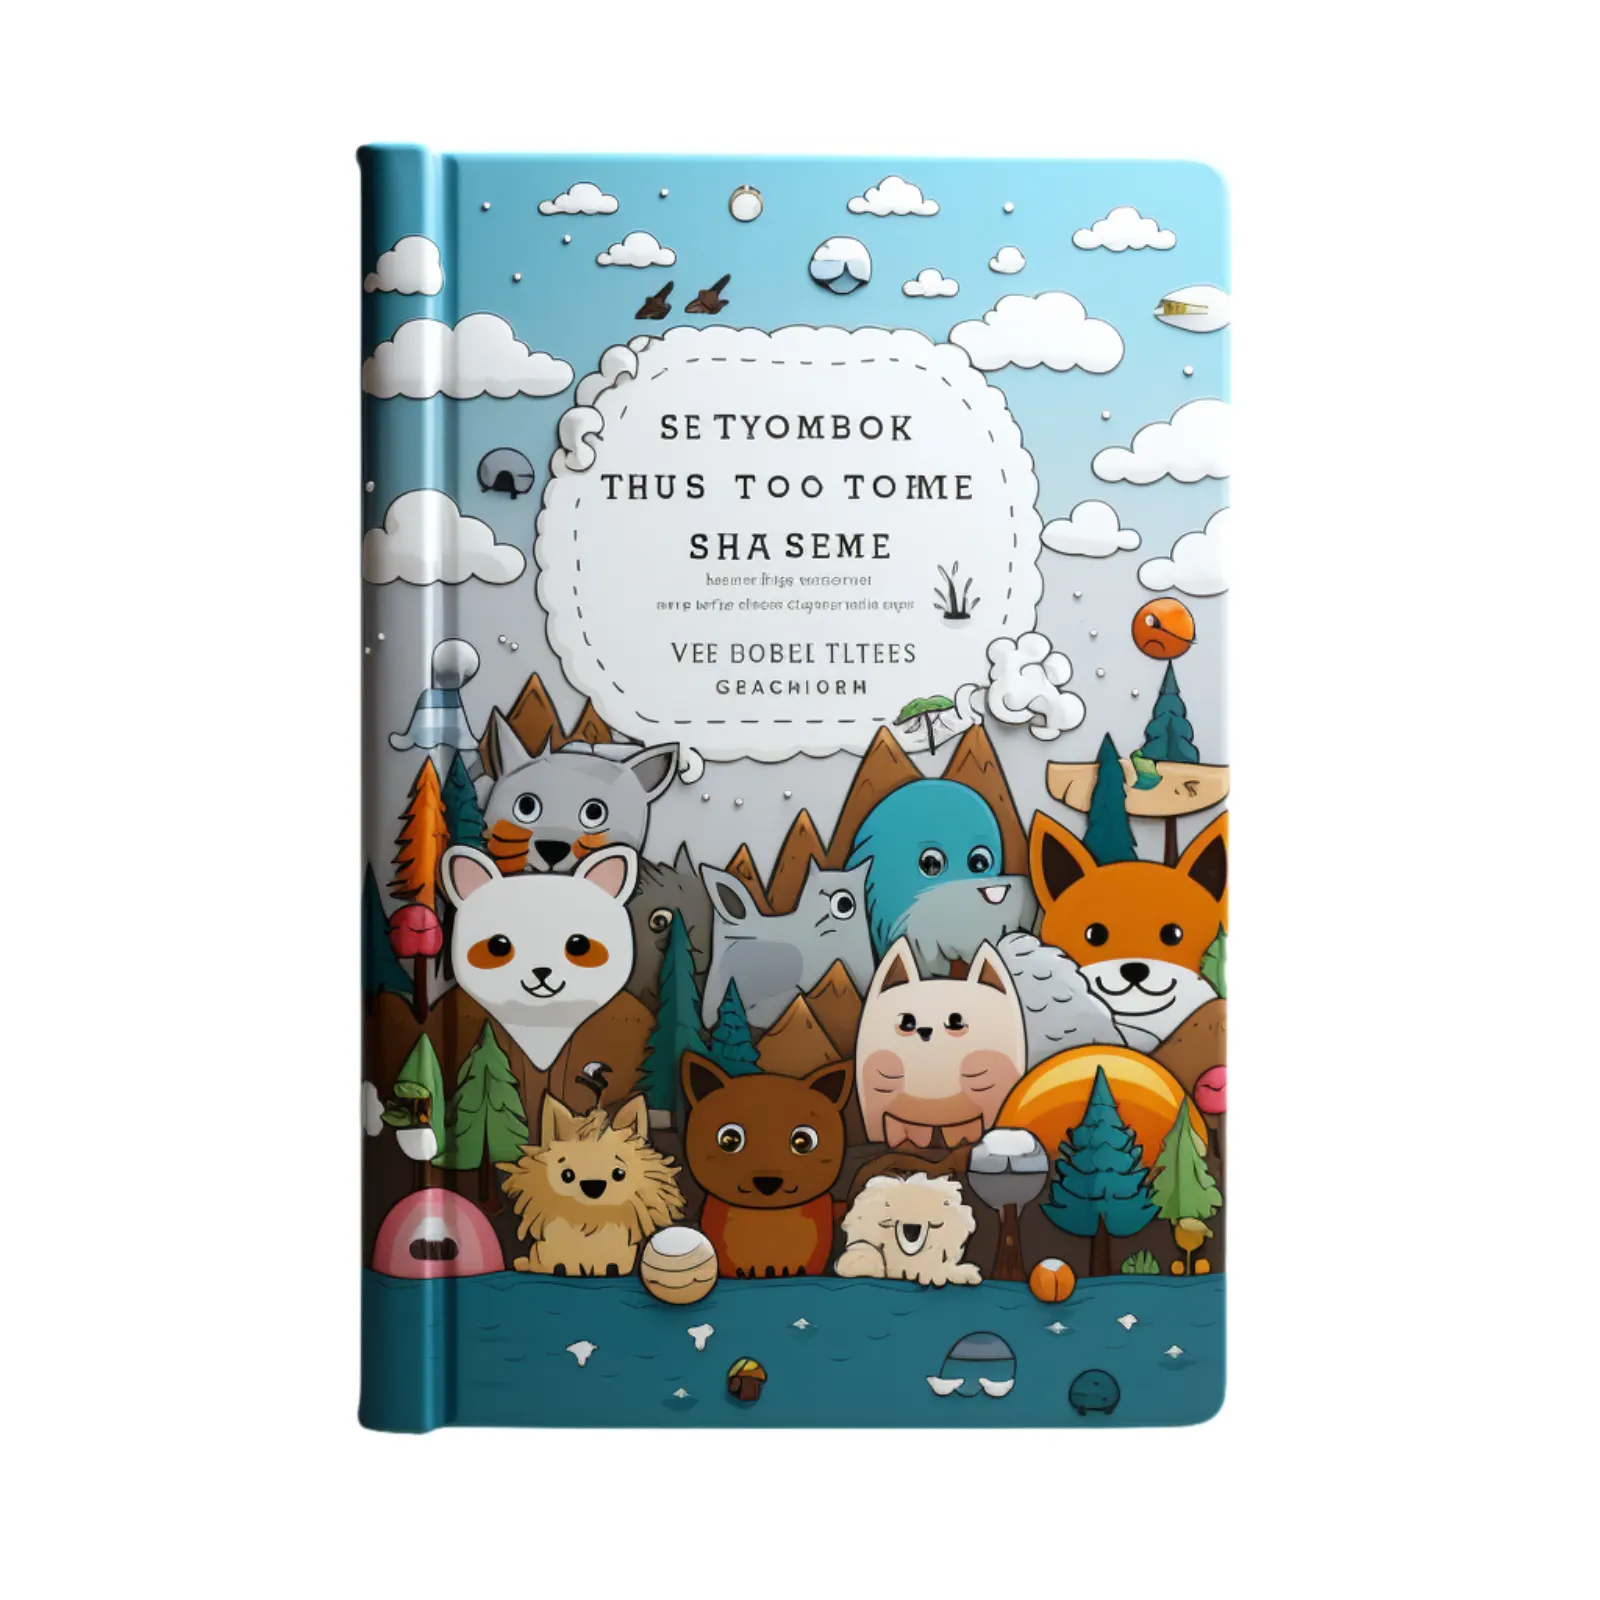 High Quality Children Hard Cover Books Printing The Contents Can Be Written Down In A Note Book